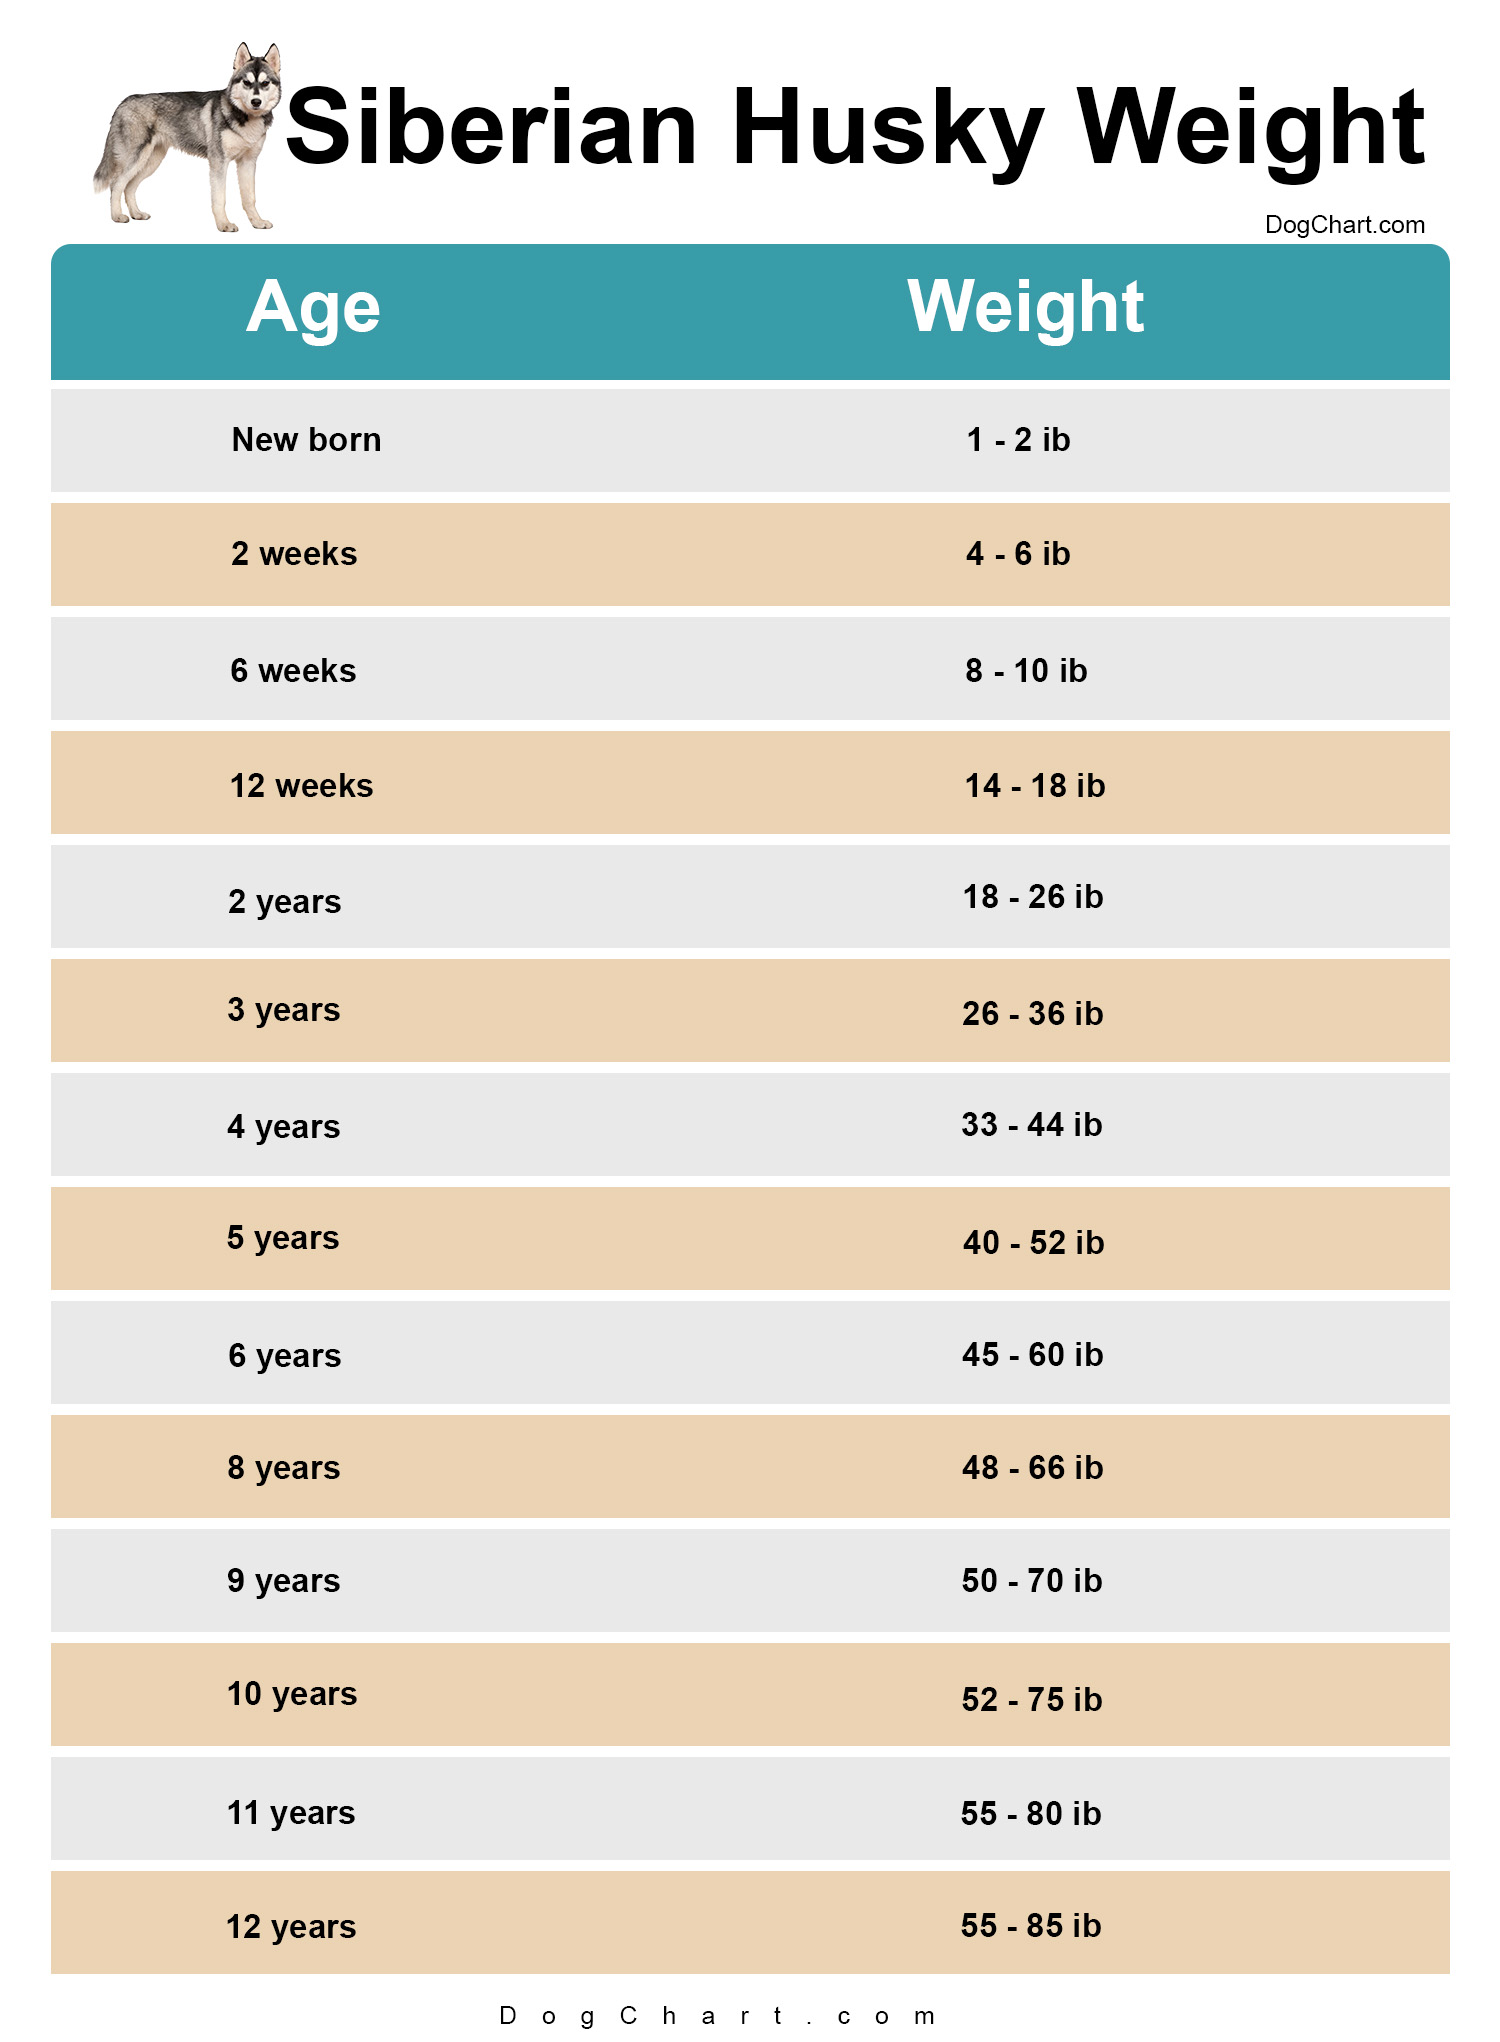 🐶 Siberian Husky Weight Chart by Age in ib